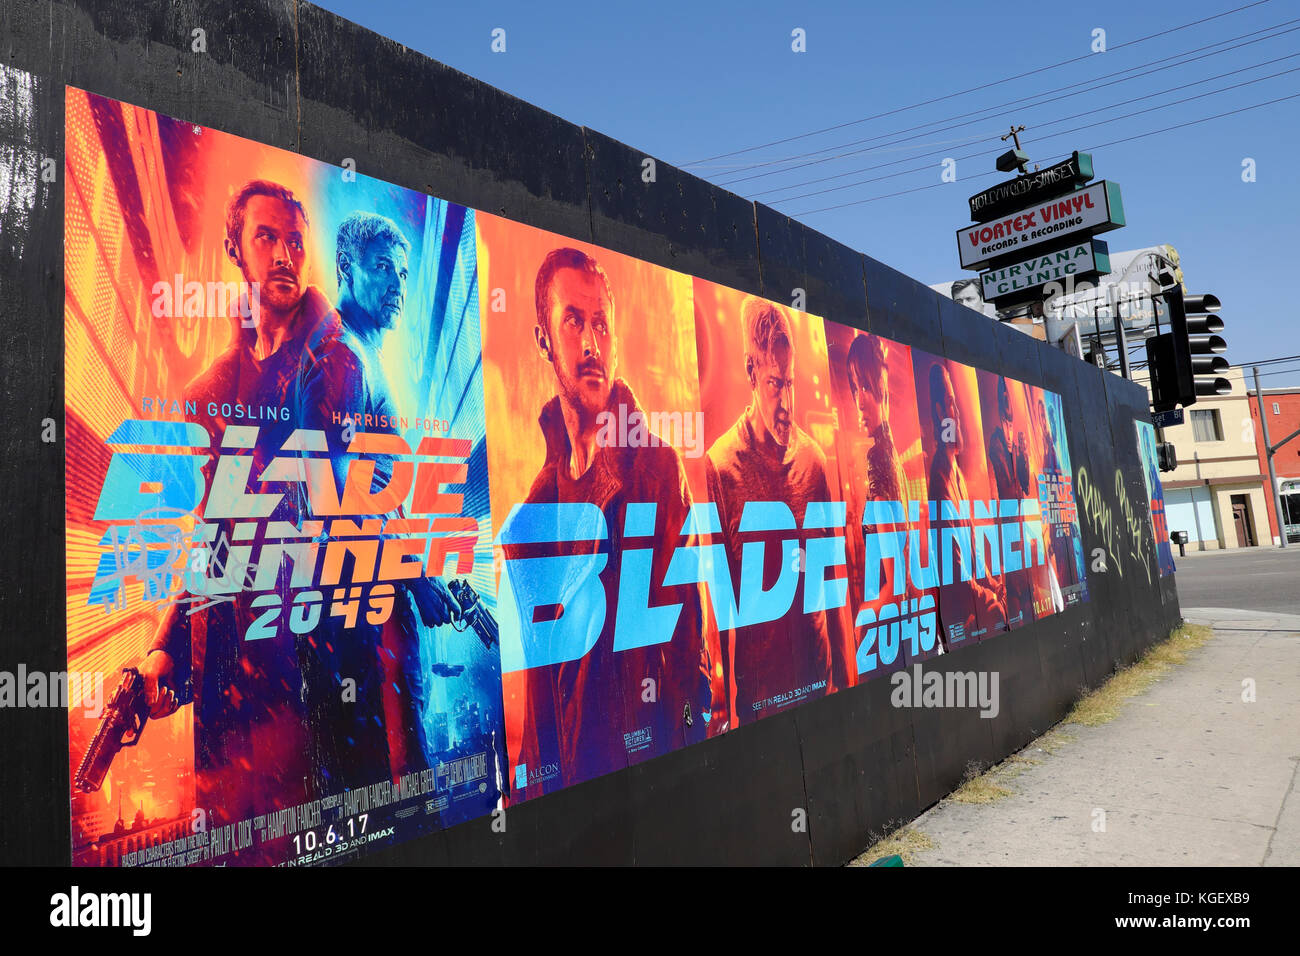 'BLADE RUNNER 2049' movie advertising poster billboard on a street hoarding at Hollywood and Sunset Boulevard in Los Angeles, California  KATHY DEWITT Stock Photo